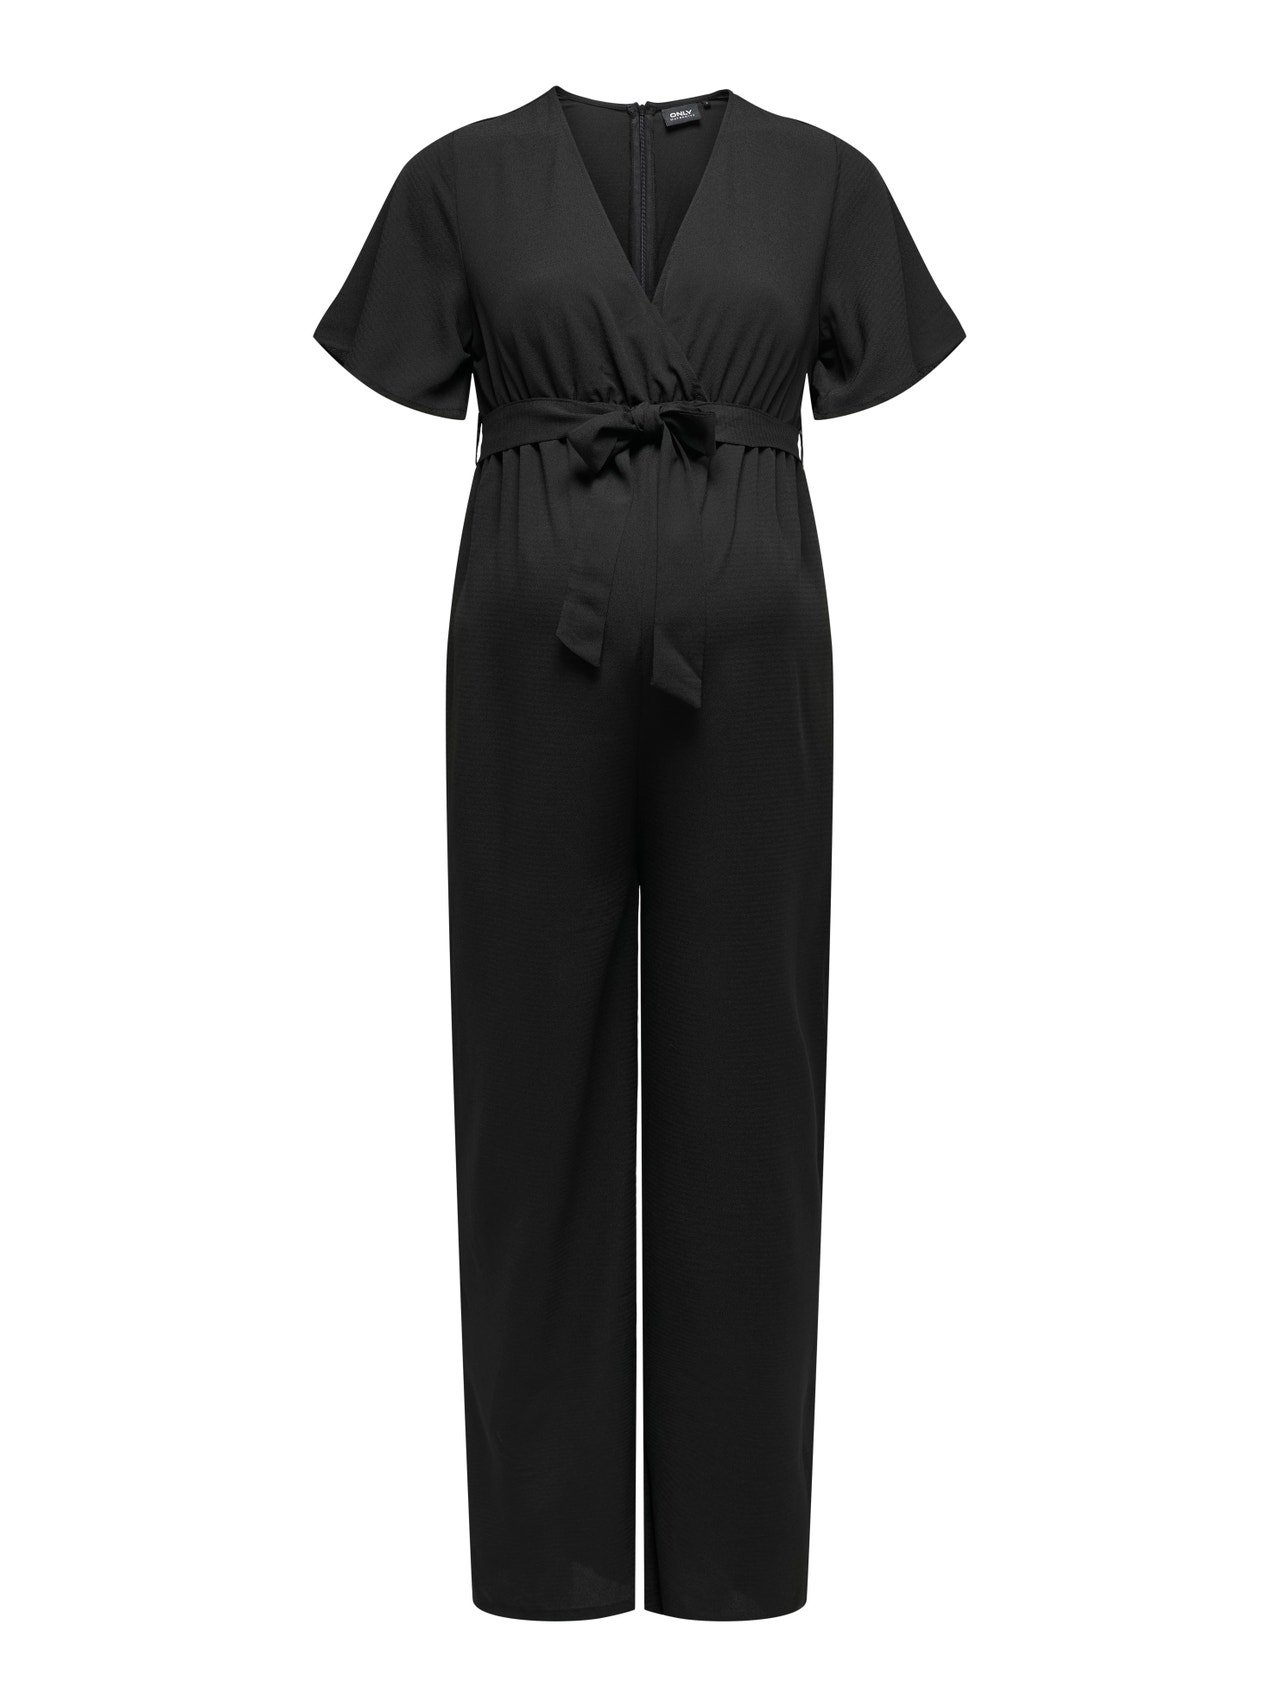 ONLY Maternity Jumpsuit -Black - 15302109